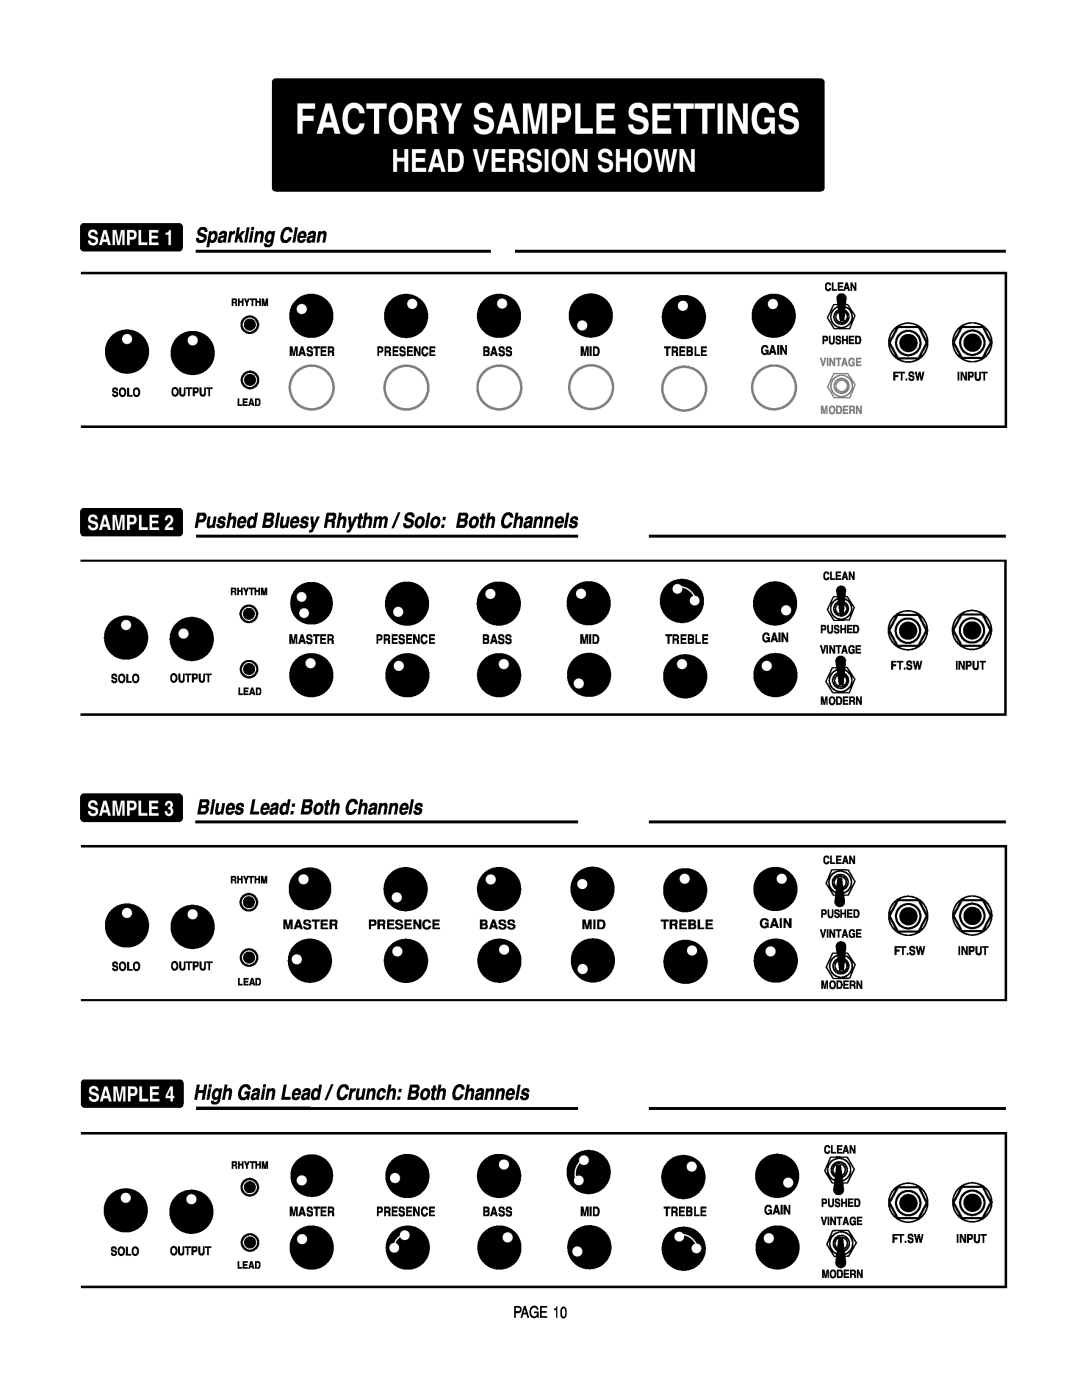 Mesa/Boogie SOLO 50, RECT-O-VERB 50 owner manual Factory Sample Settings, Head Version Shown, SAMPLE 1 Sparkling Clean 